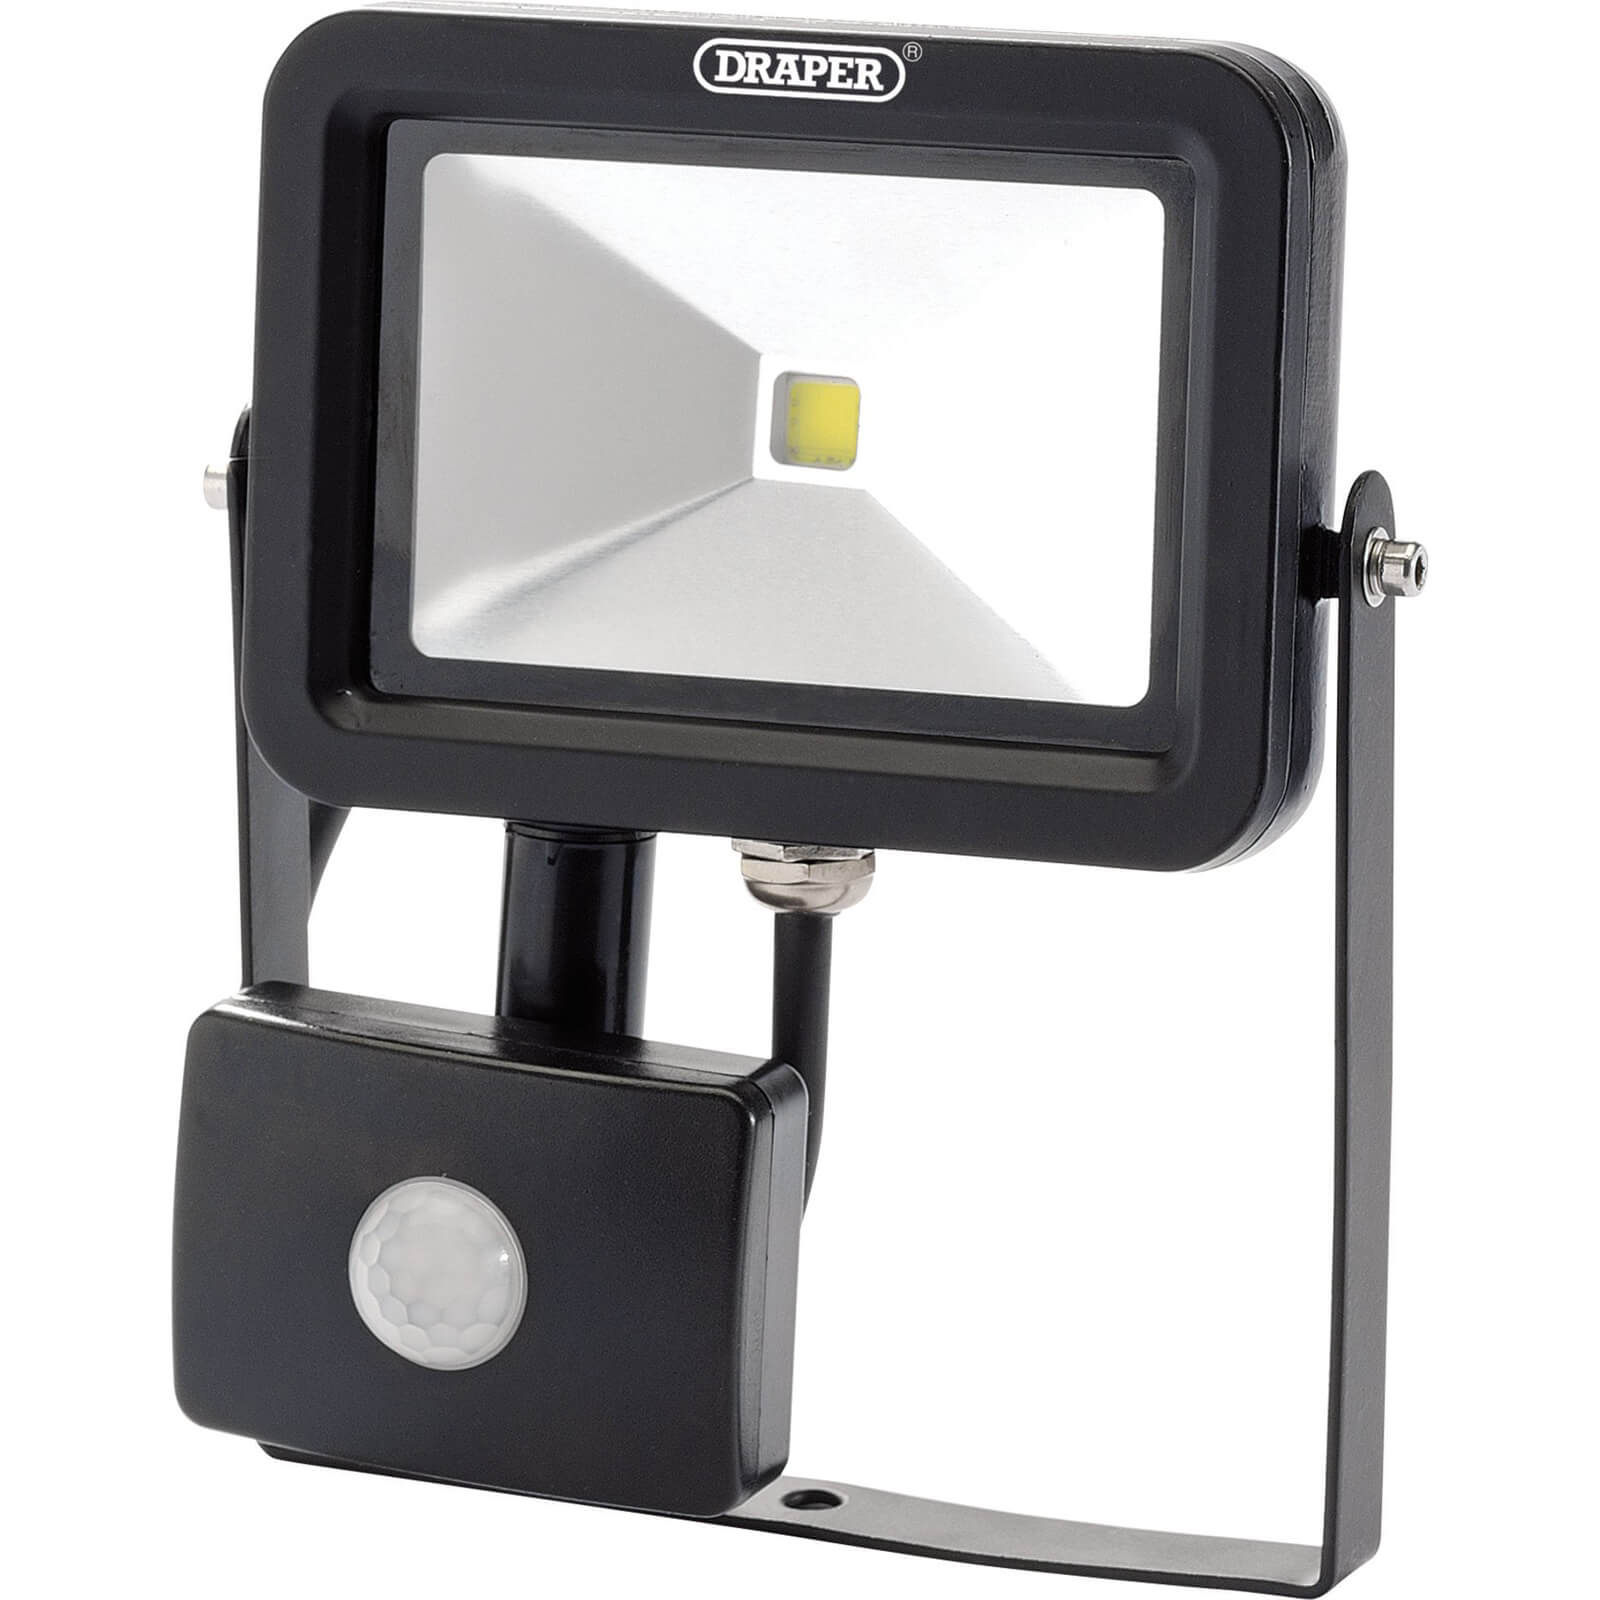 Image of Draper COB LED Slimeline Wall Mounted Floodlight With PIR 10 Watts